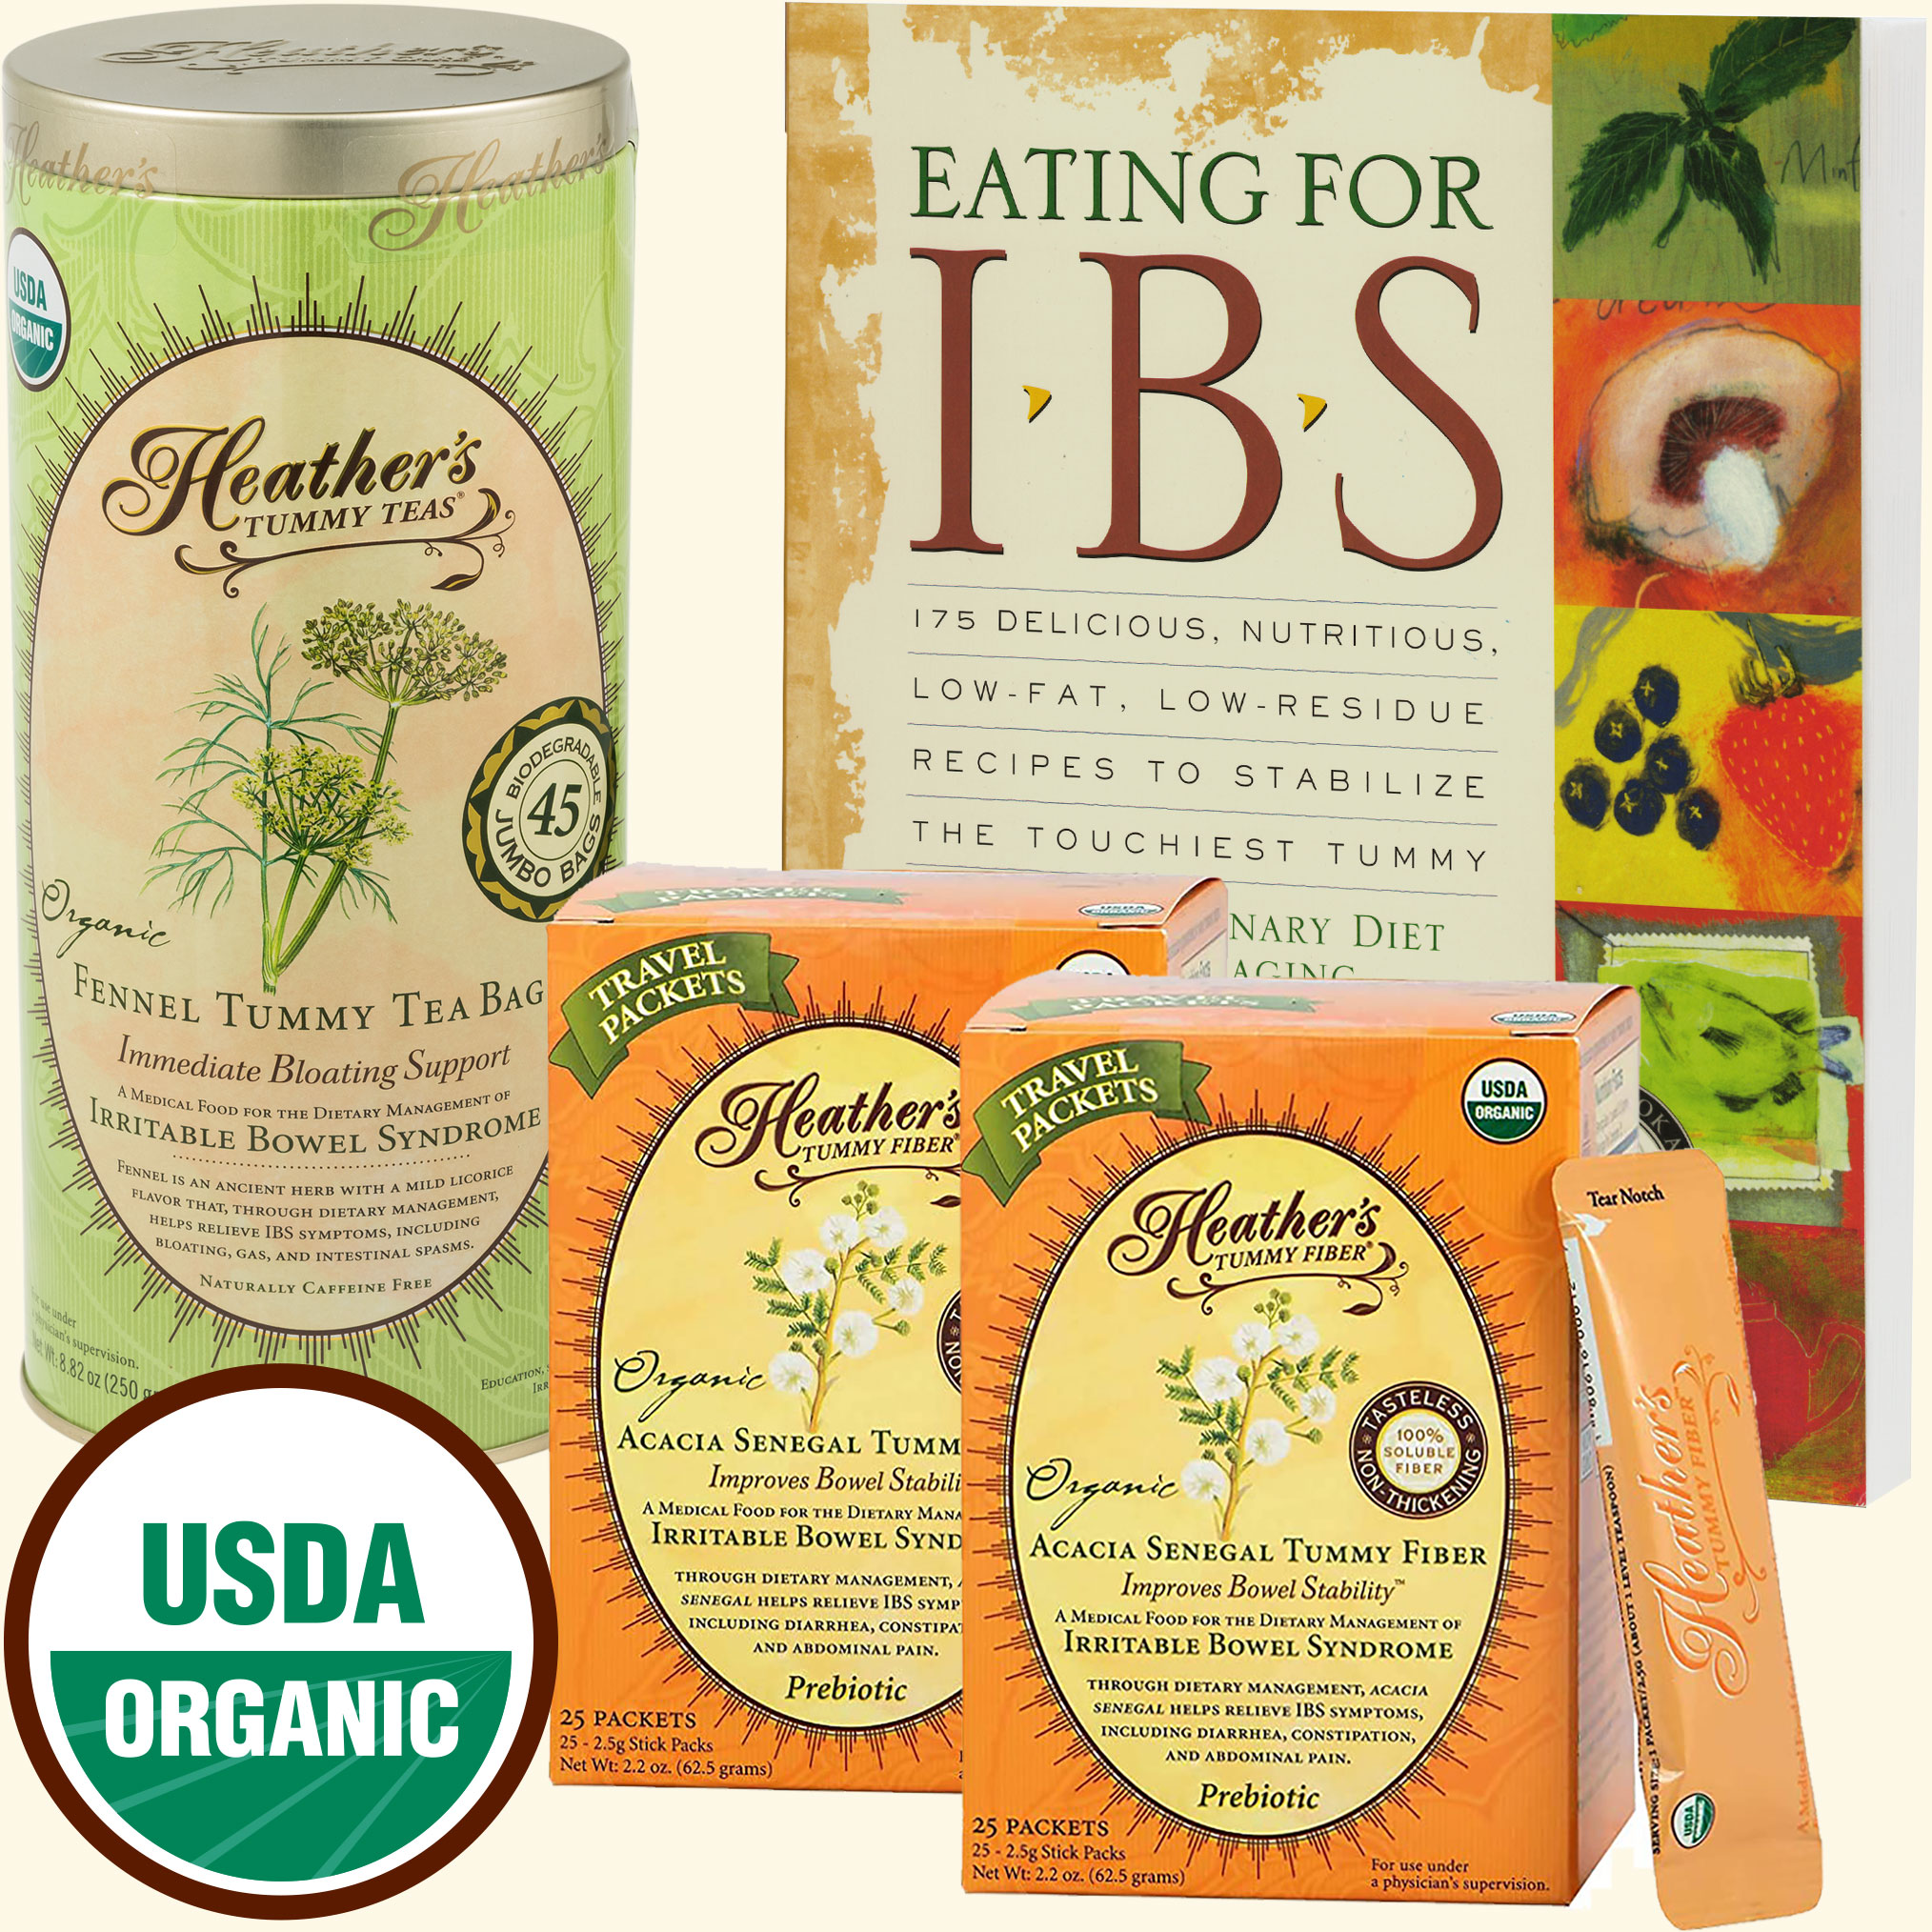 IBS Belly Bloat Kit<br>Eating for IBS,<BR>Fennel TEABAGS,<BR>1 Travel Pack Box